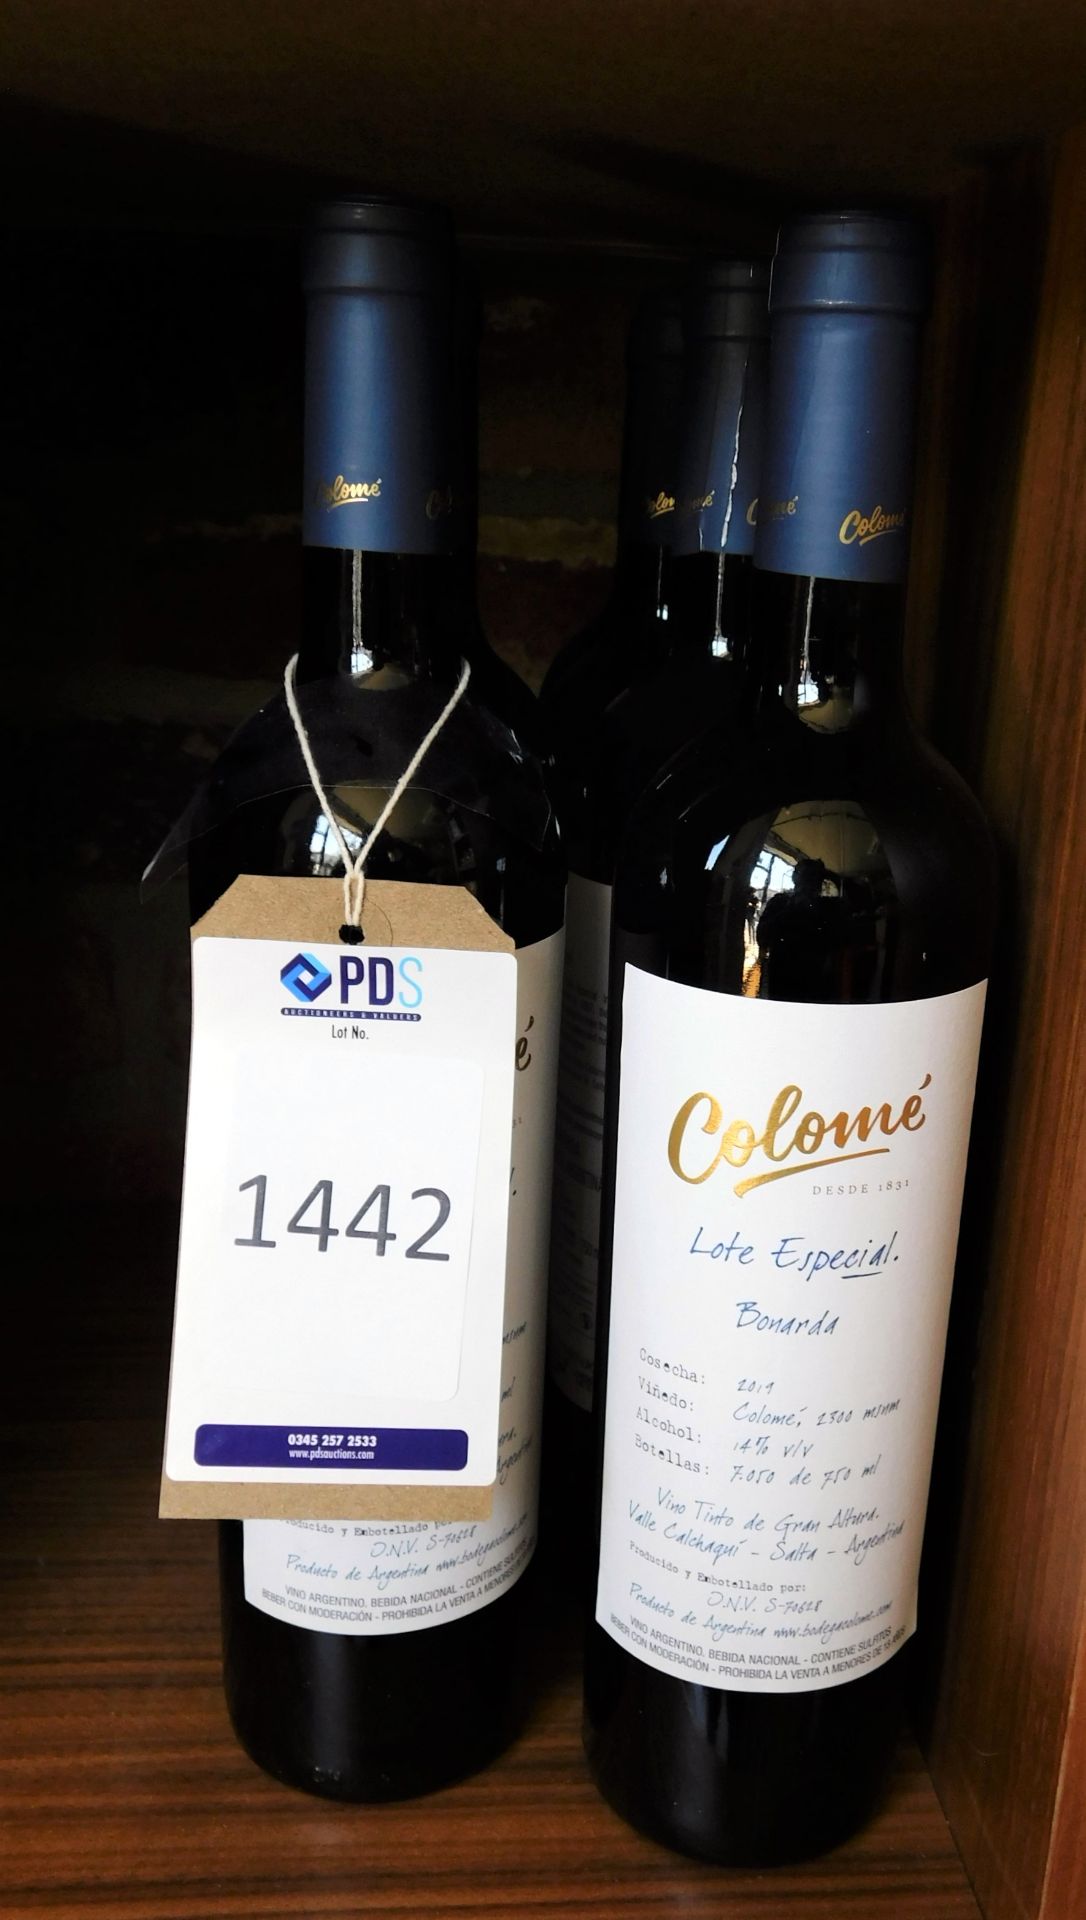 6 Colome Lote Especial Bonarda 2019 (Location: Brentwood. Please Refer to General Notes)